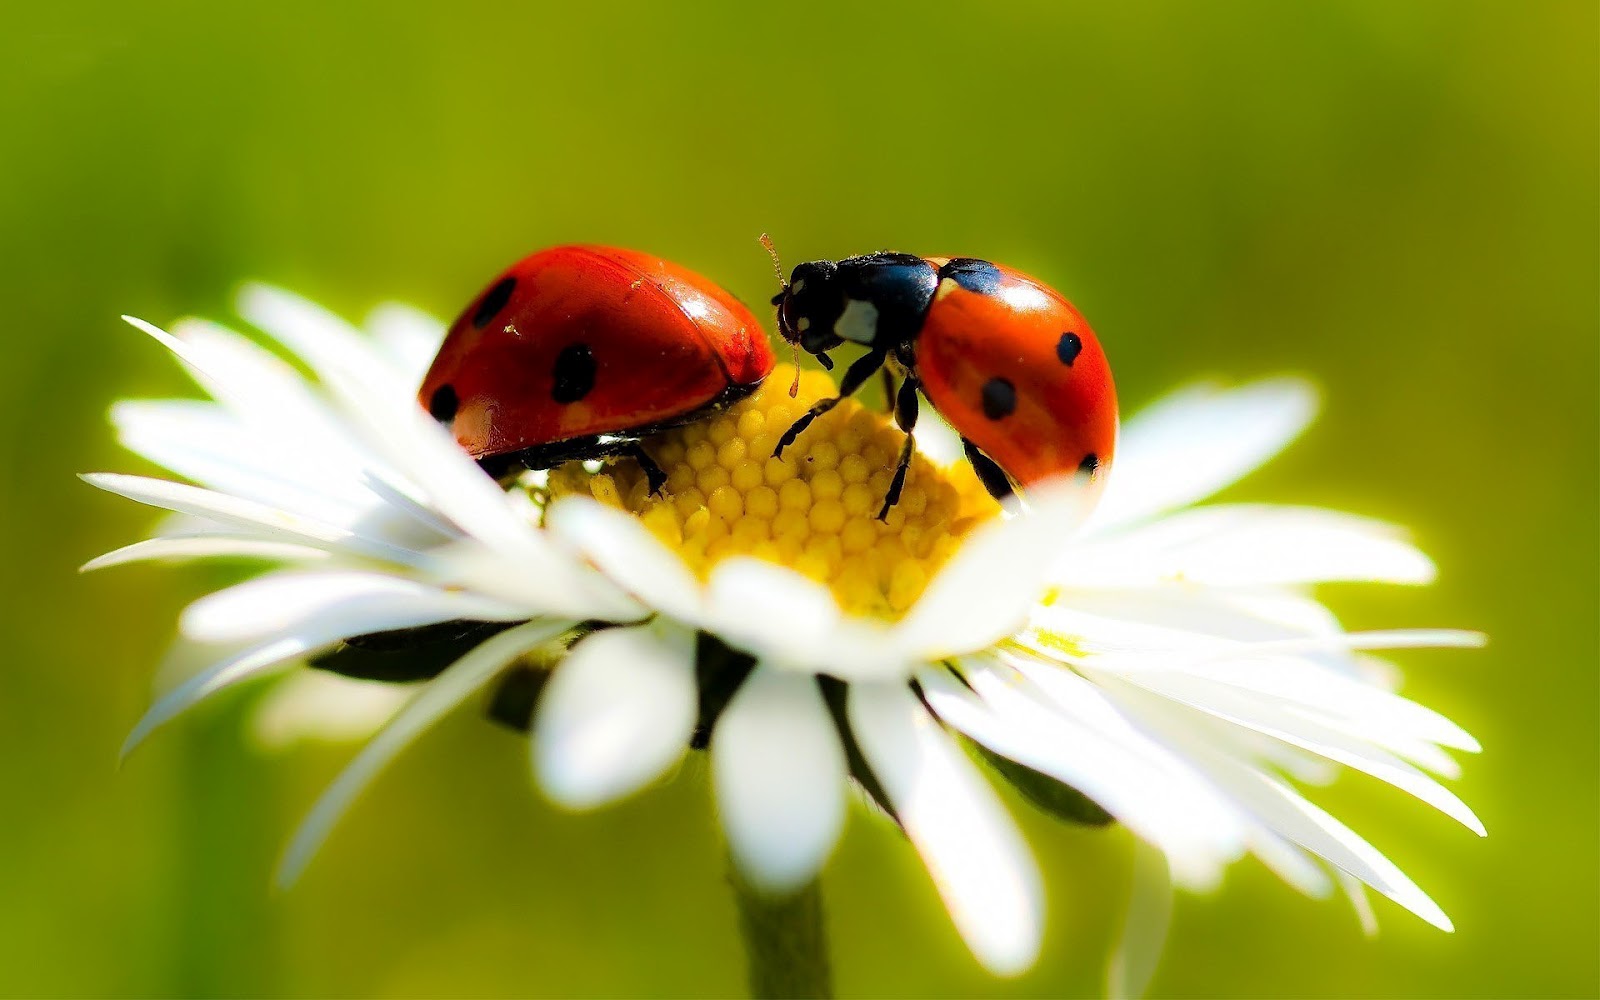 HD Ladybug Wallpaper With Two Ladybugs On A White Flower